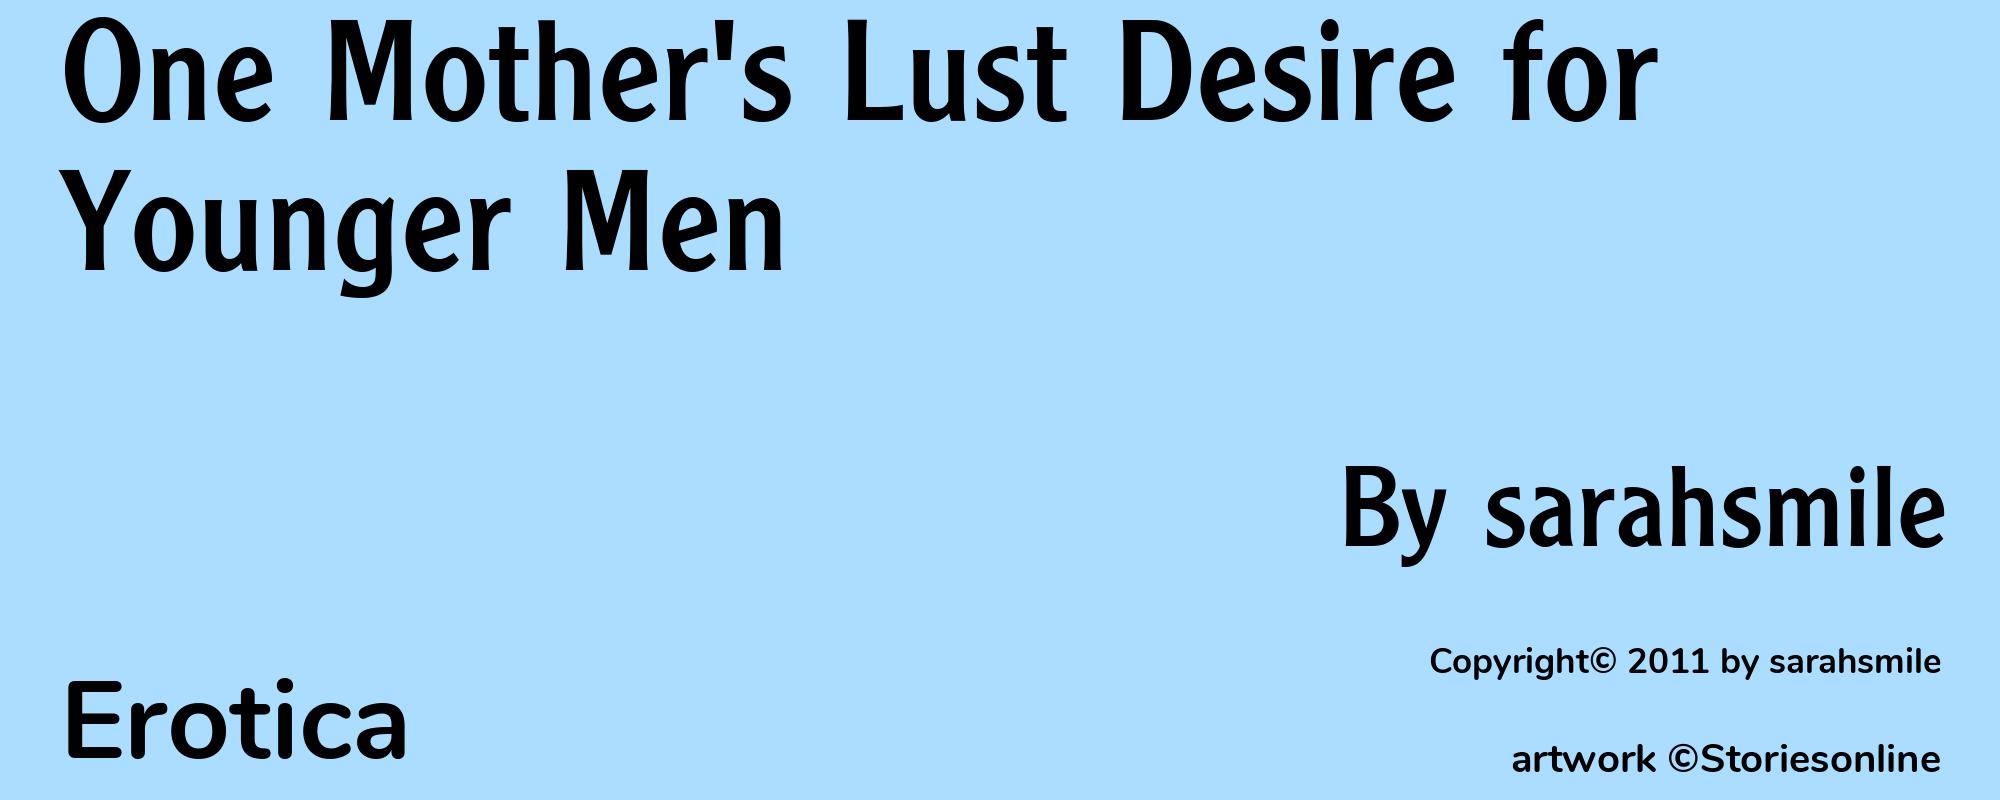 One Mother's Lust Desire for Younger Men - Cover